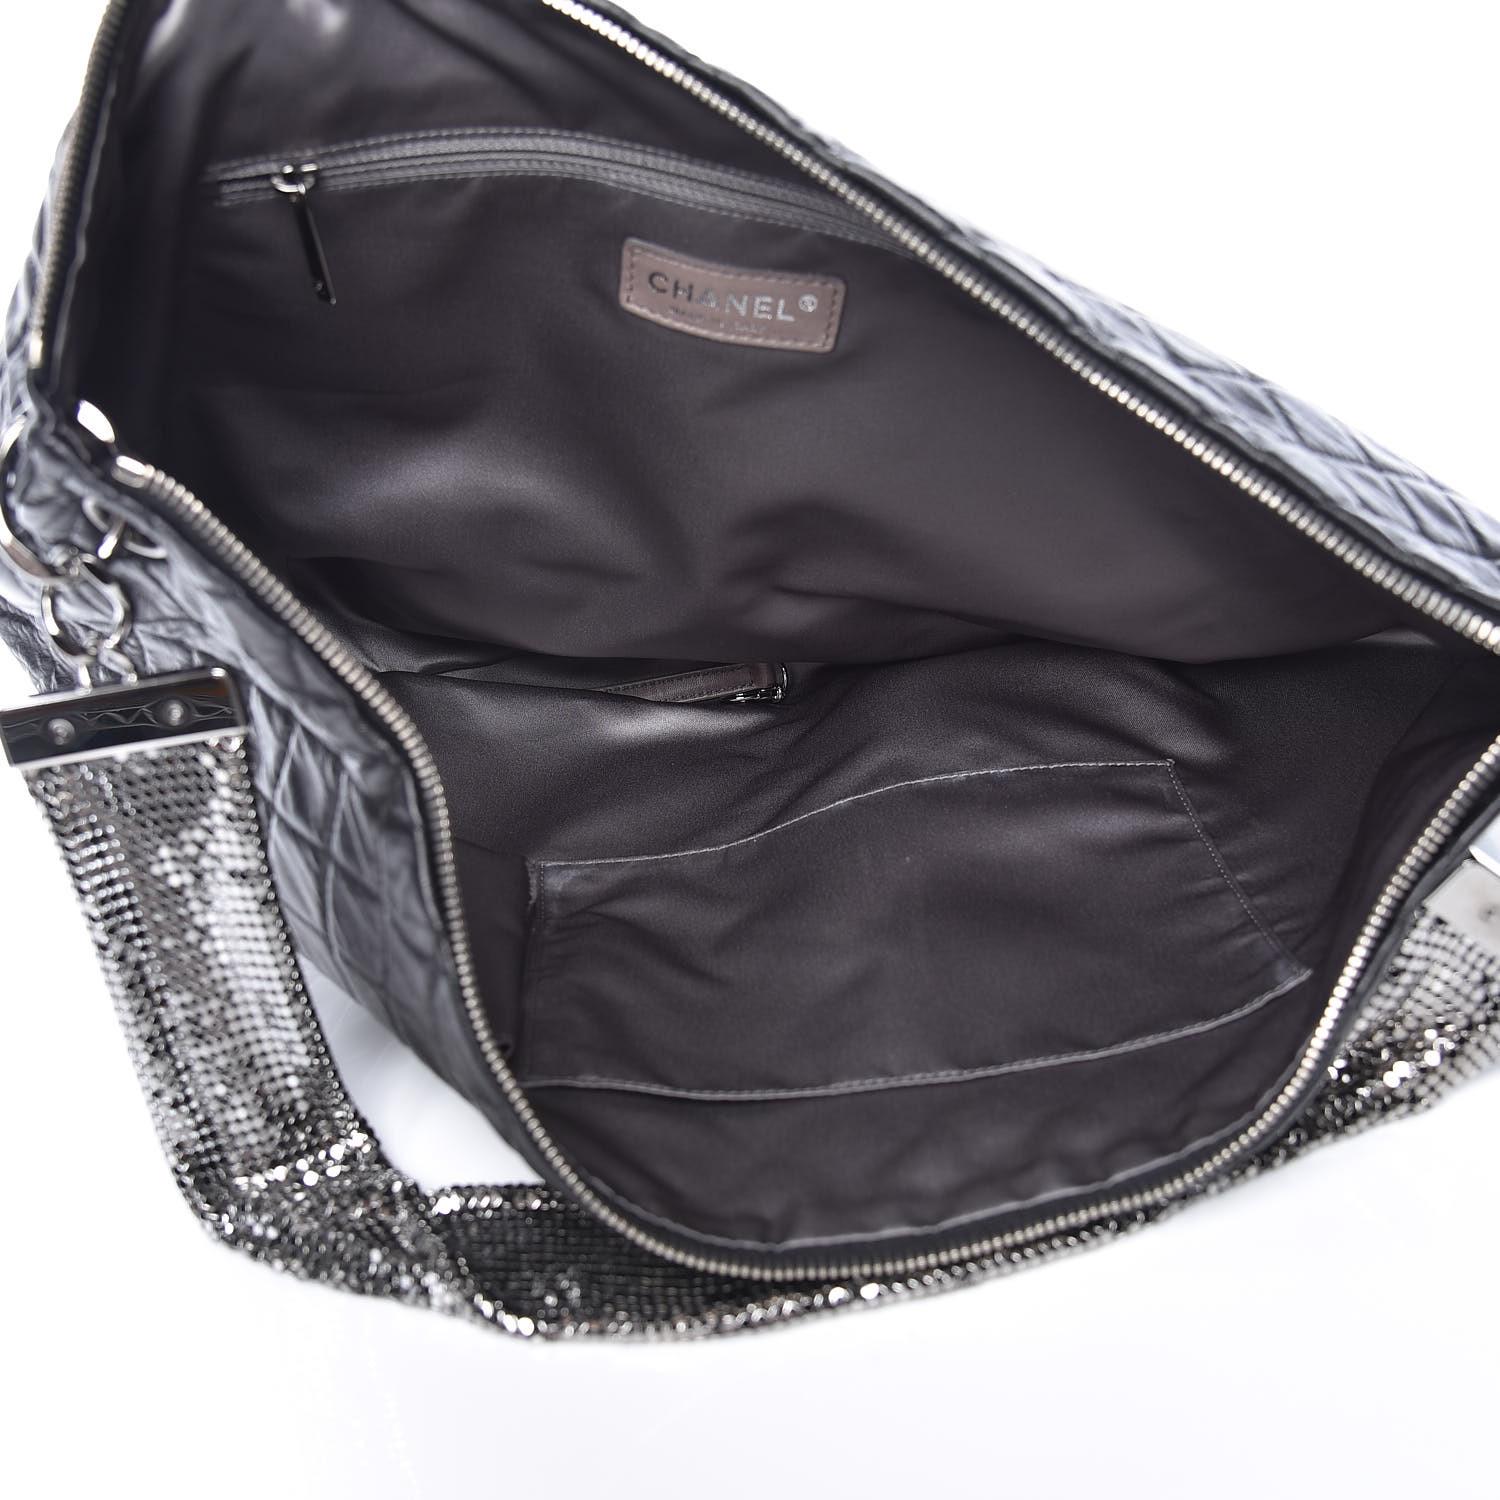 Chanel 2008 Metallic Mesh Soft Quilted Black Lambskin Leather Large Hobo Bag For Sale 9